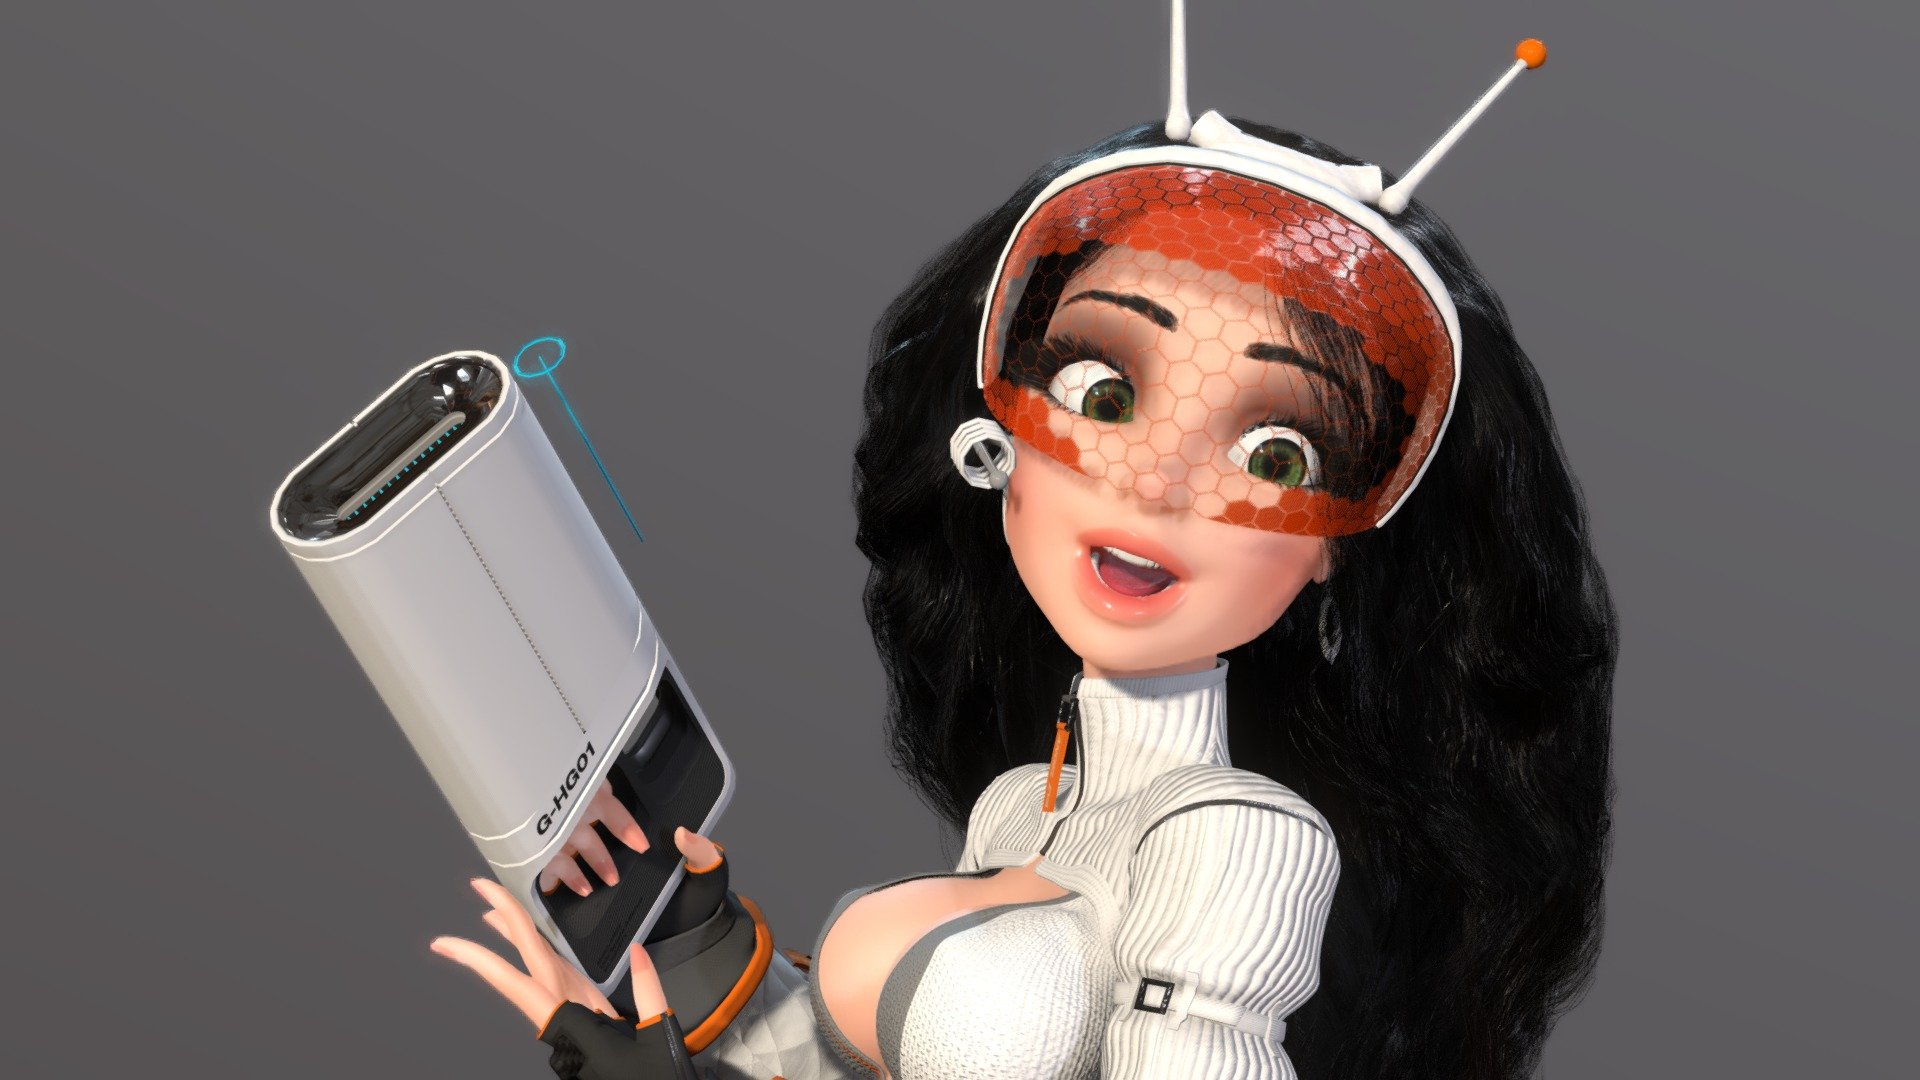 The Groovy Space Girl is a fully rigged character for Blender and Unity. She’s painstakingly crafted with a full body and face rig. There is also several interchangeable clothing items and a large library of face expressions, visemes,  hand poses, and body poses 3d model